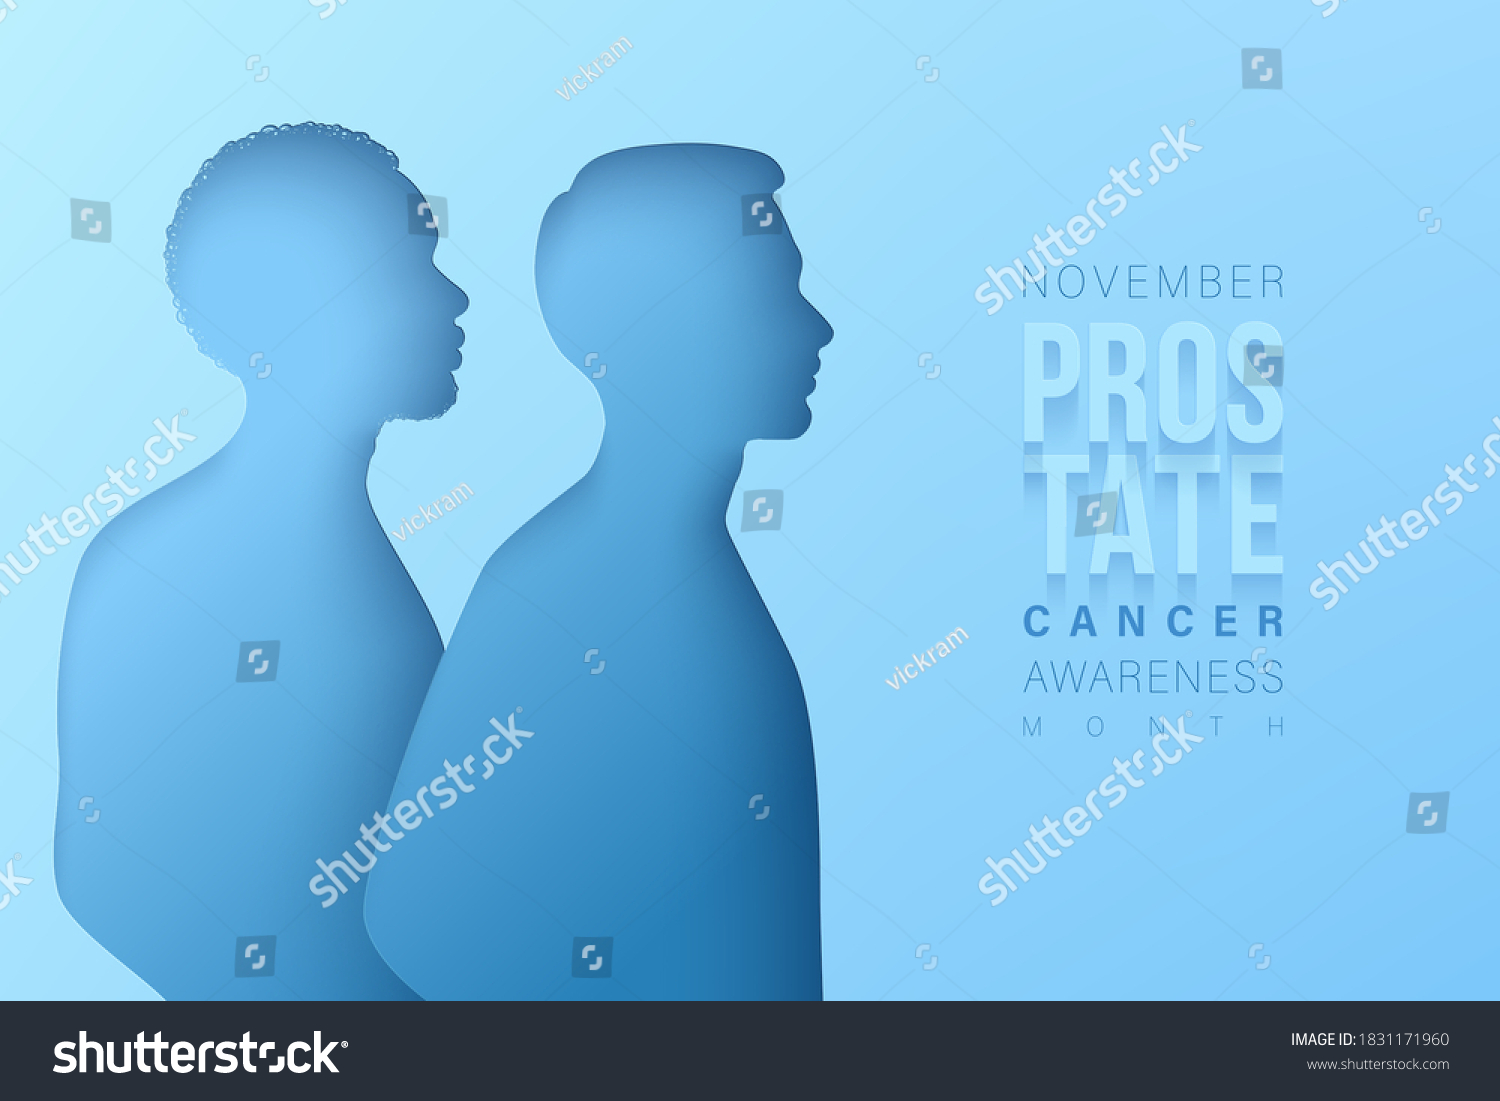 November prostate cancer awareness month. Paper cut black man and white man silhouettes on a blue backdrop. Men healthcare concept #1831171960